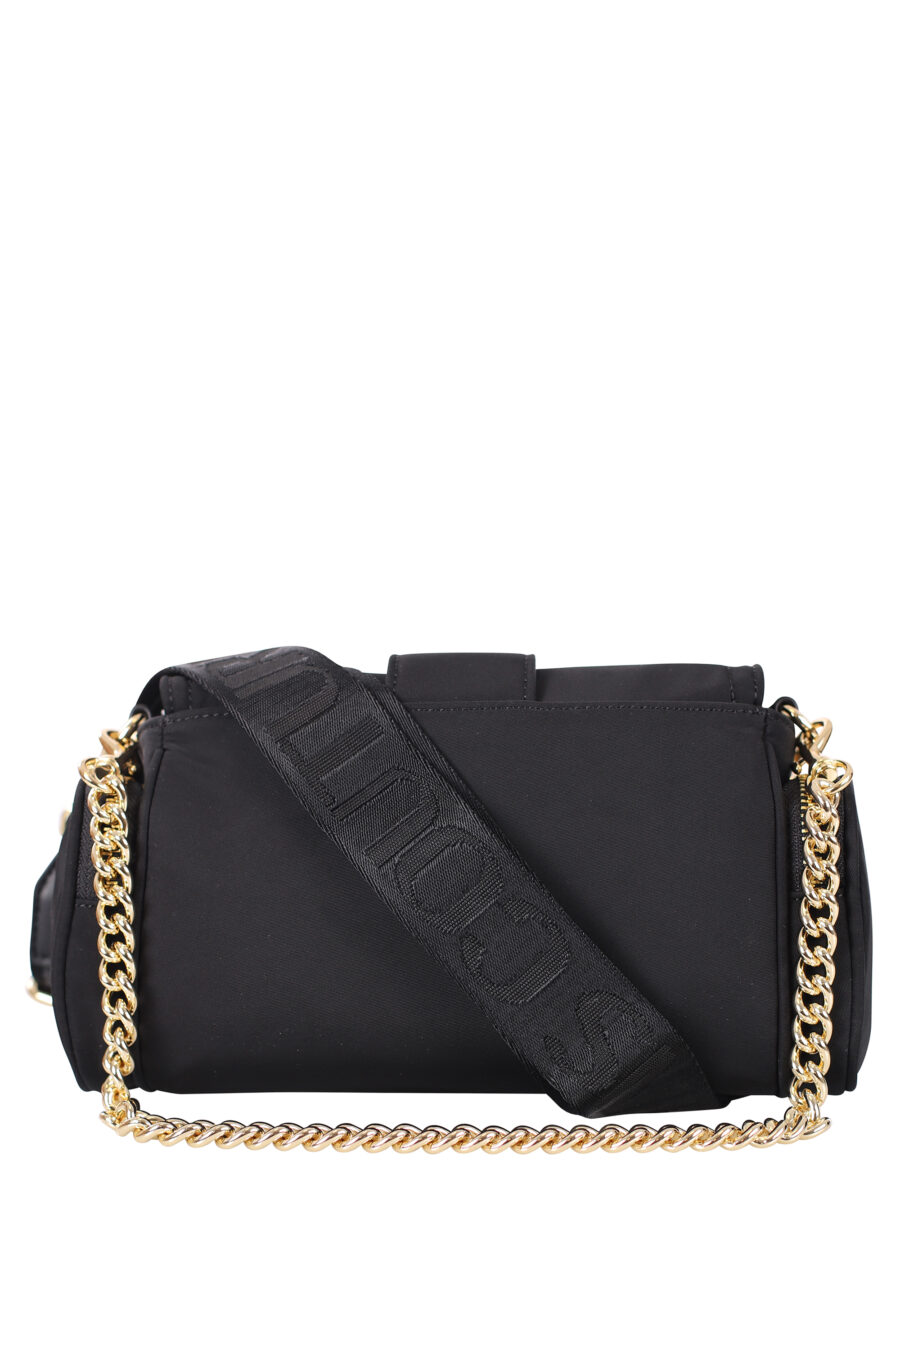 Black shoulder bag with studs and baroque buckle - IMG 0547